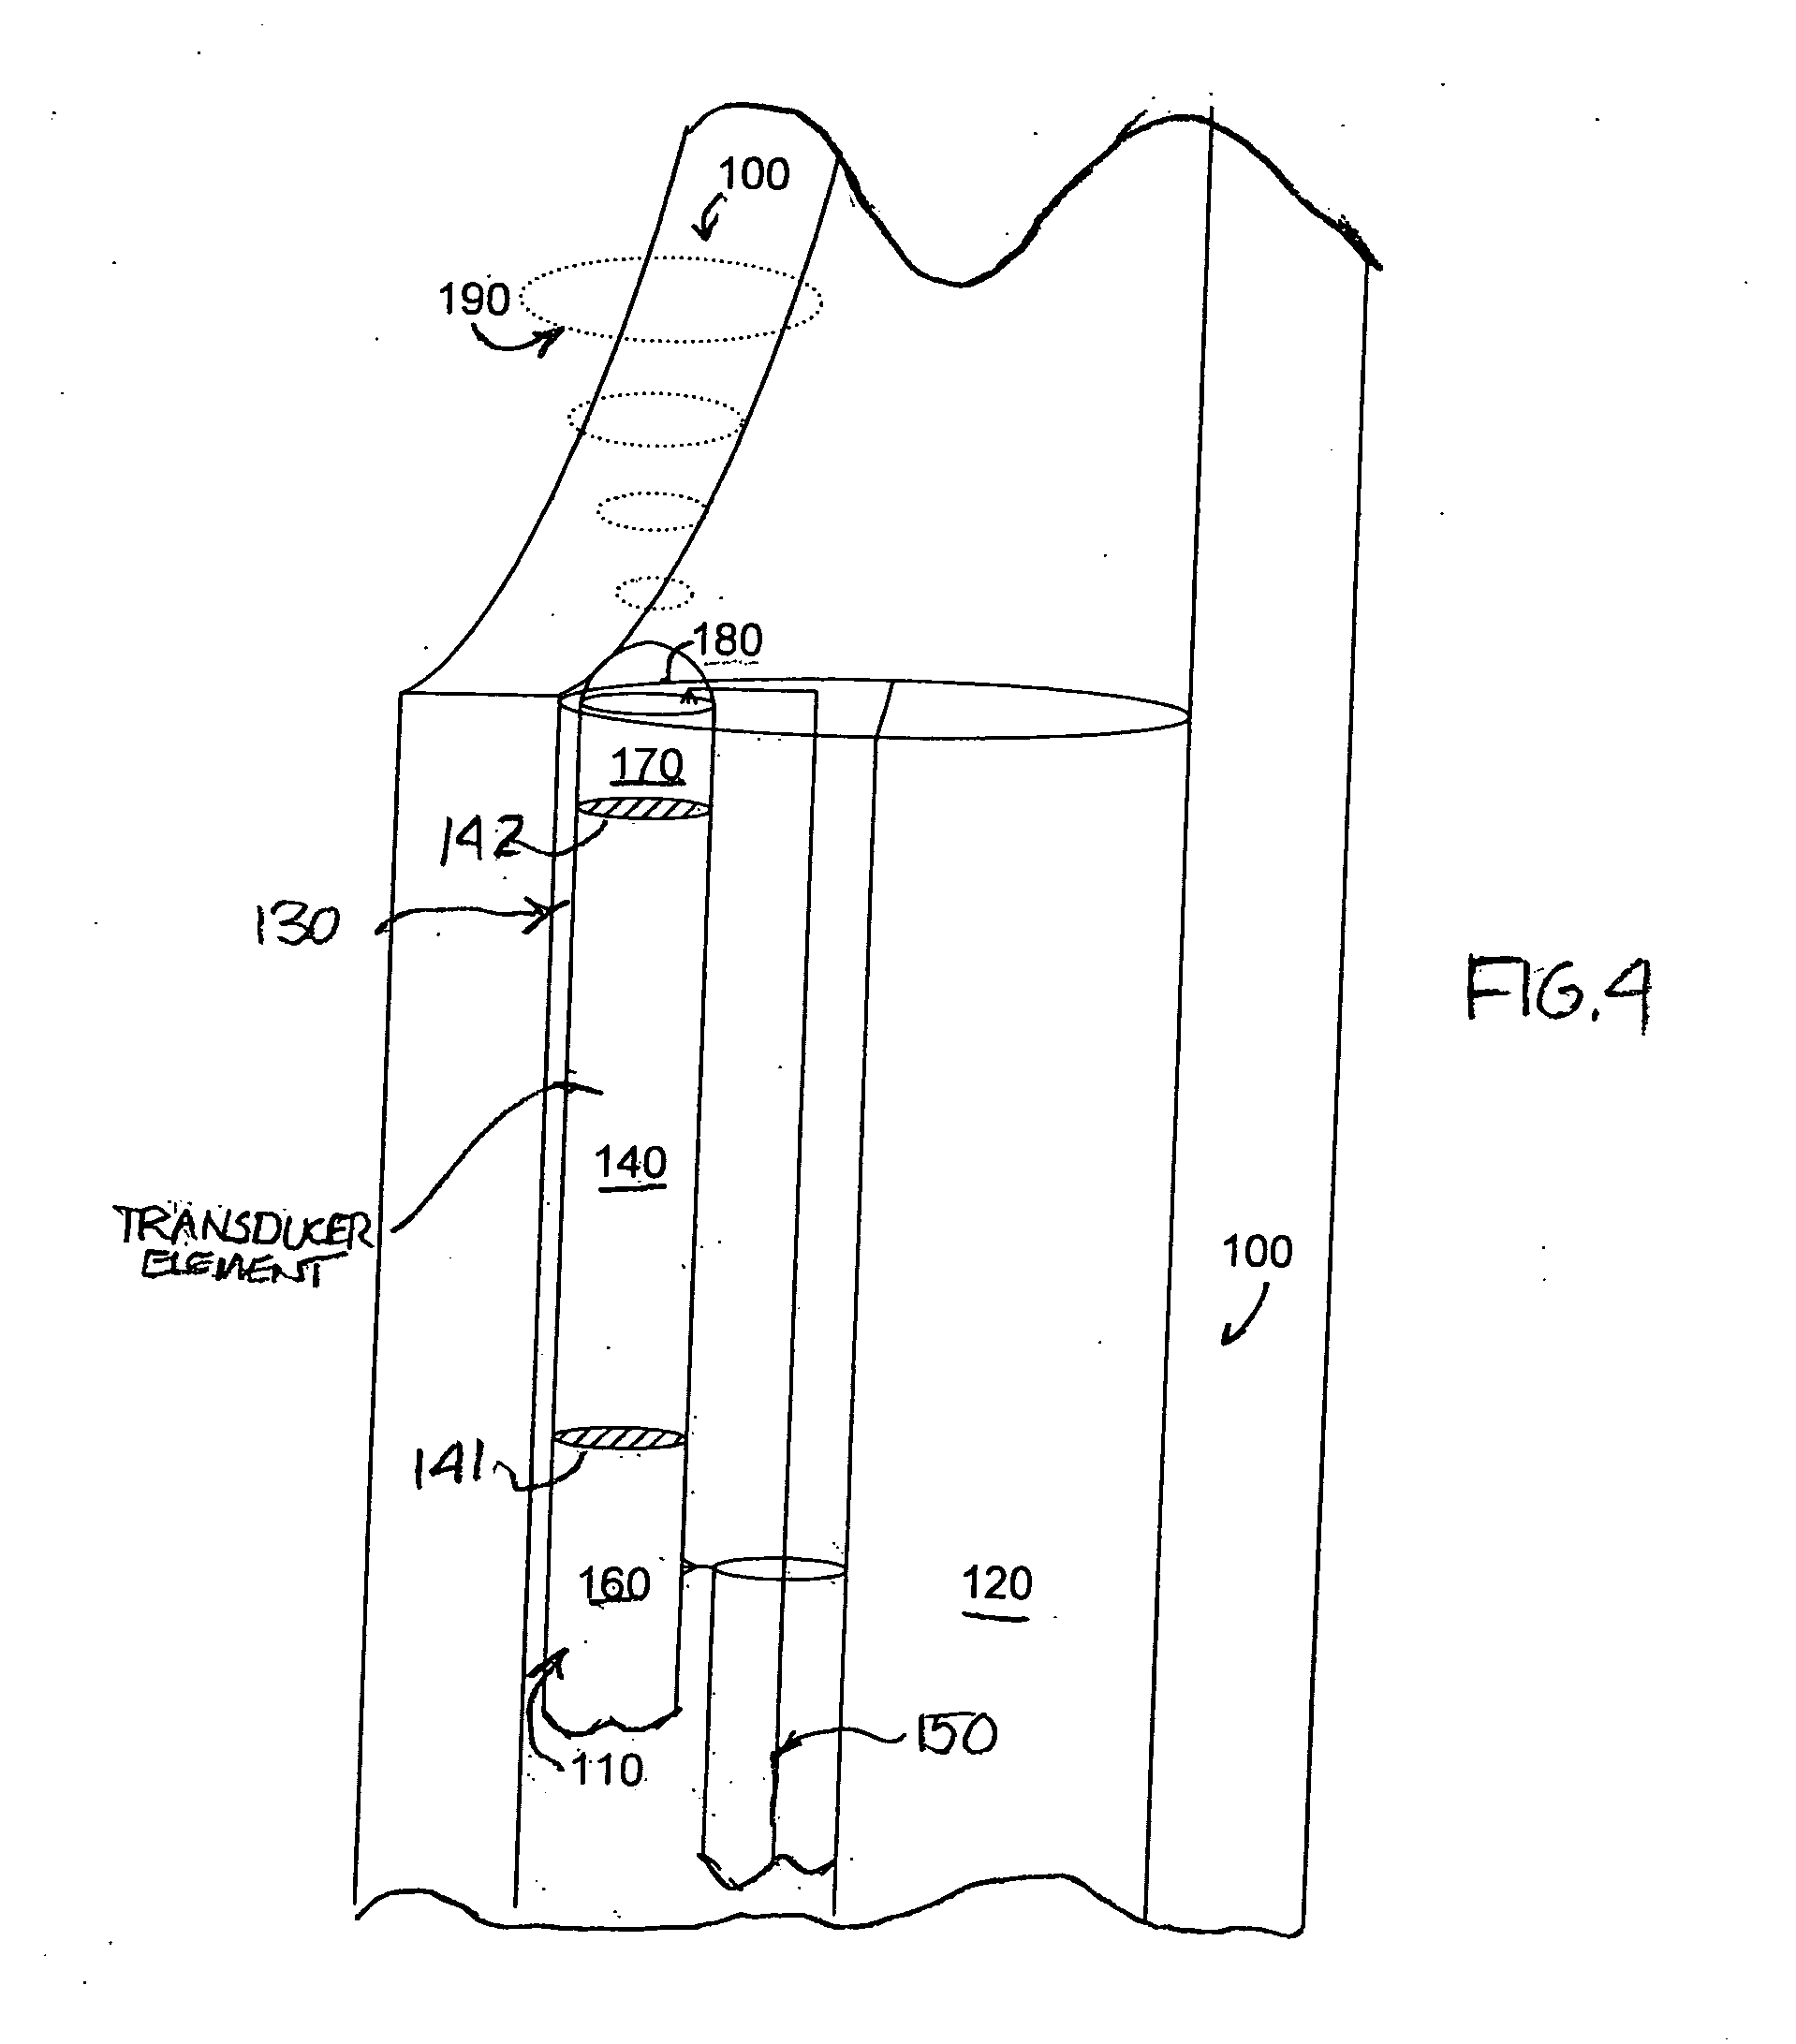 Acoustic device for needle placement into a joint